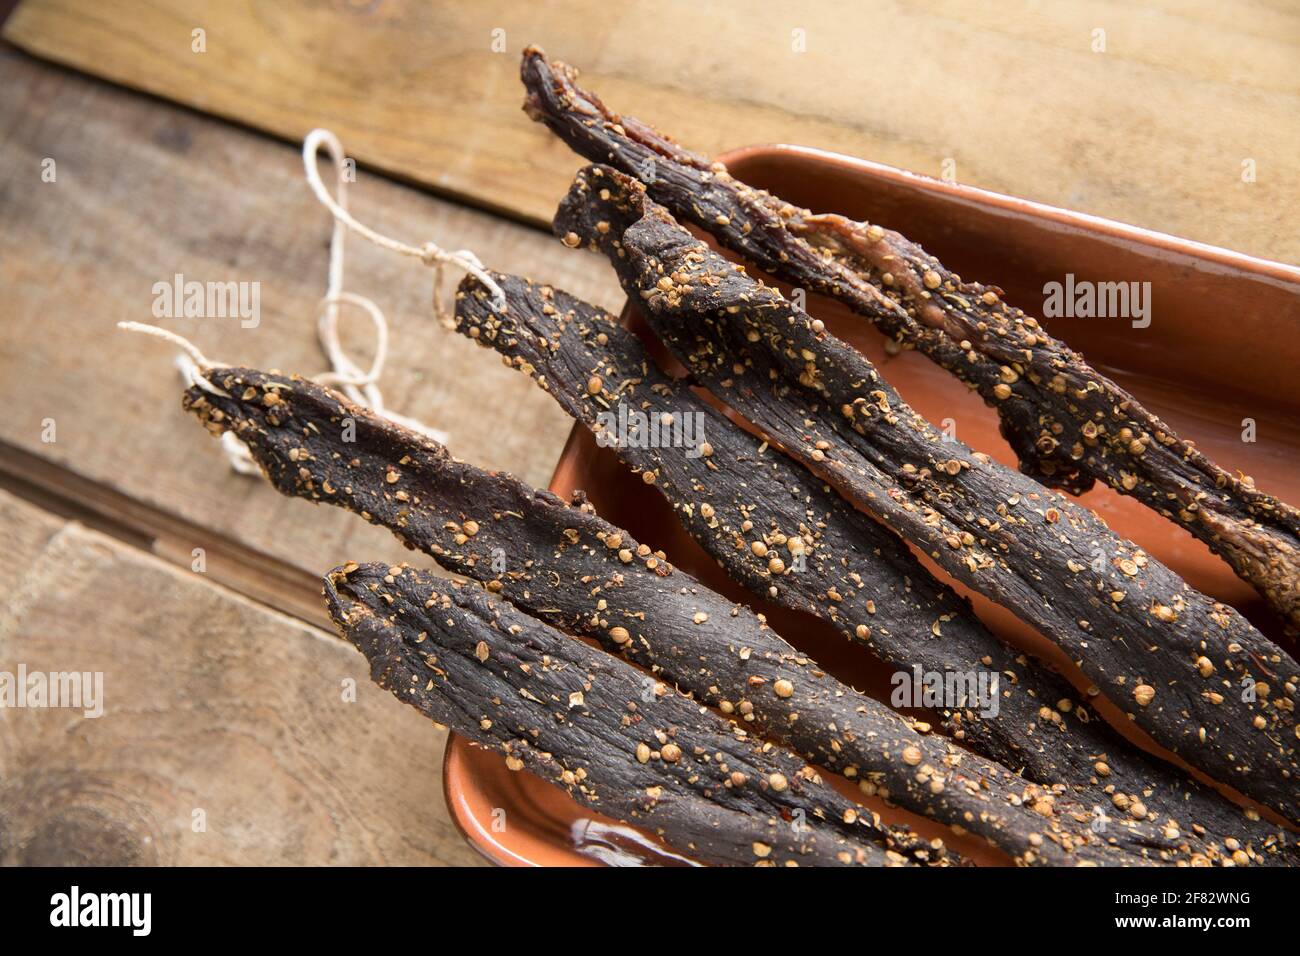 Strips of British beef from a roasting joint that have been air dried at home to make biltong using salt, sugar, brown vinegar and spices including co Stock Photo